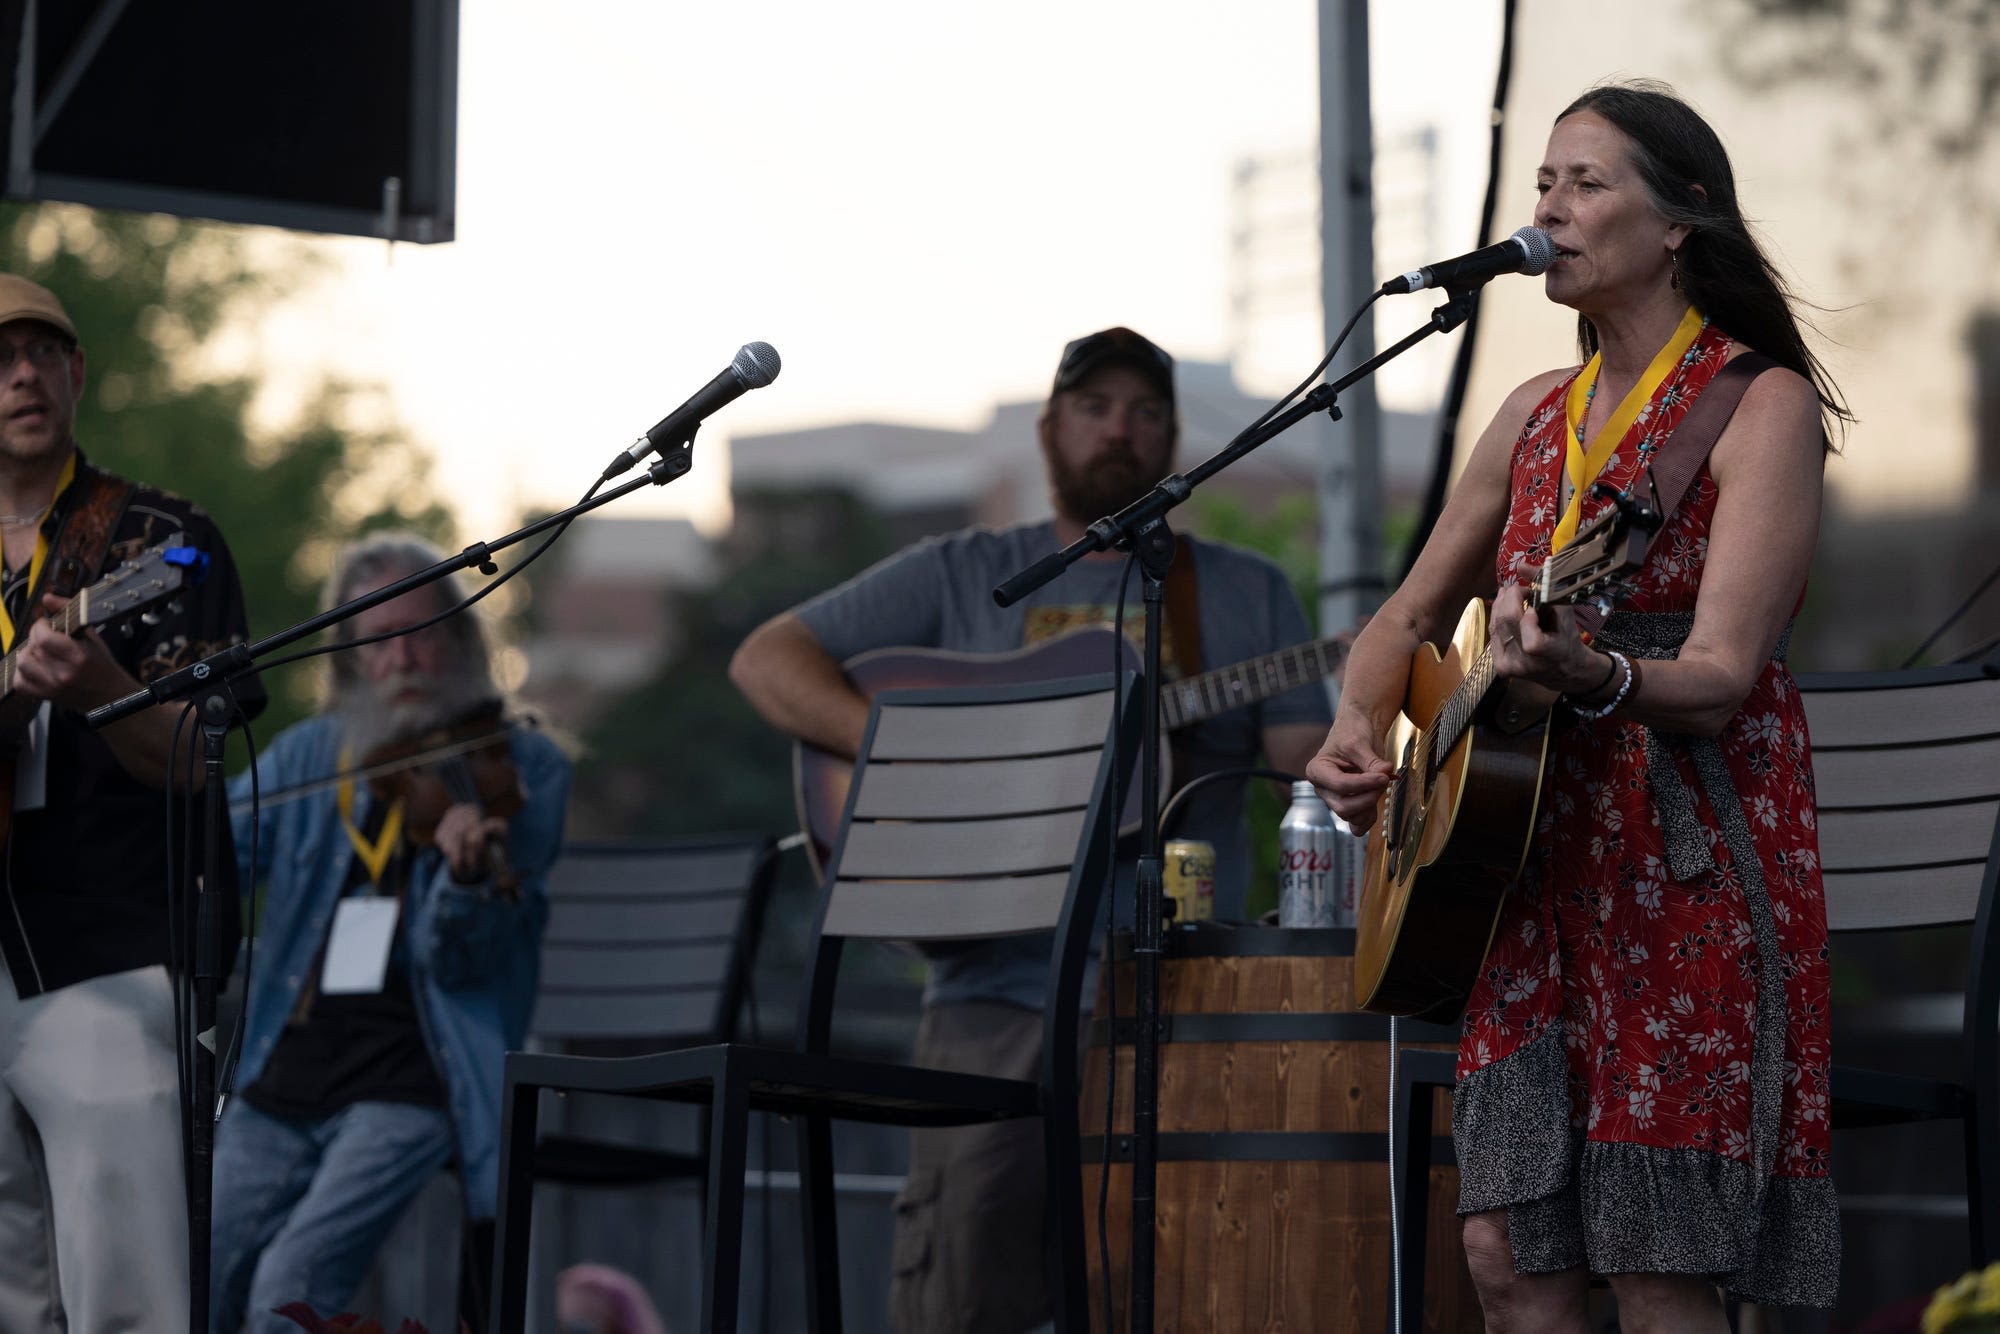 Bob Childers' Gypsy Café music festival brings Oklahoma songwriters together for good cause